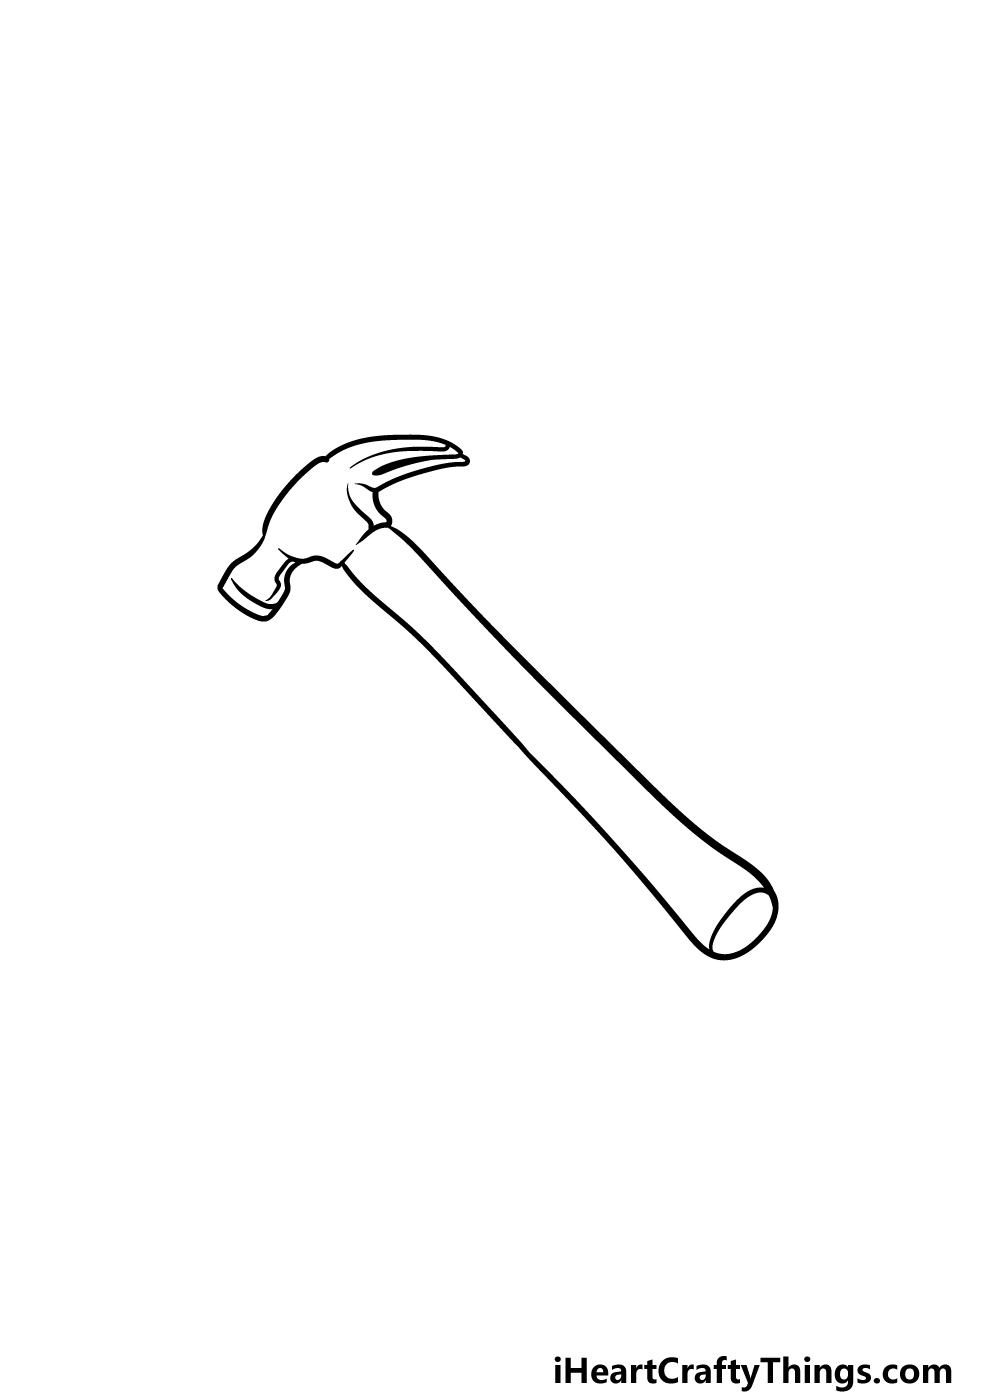 how to draw a hammer step 3